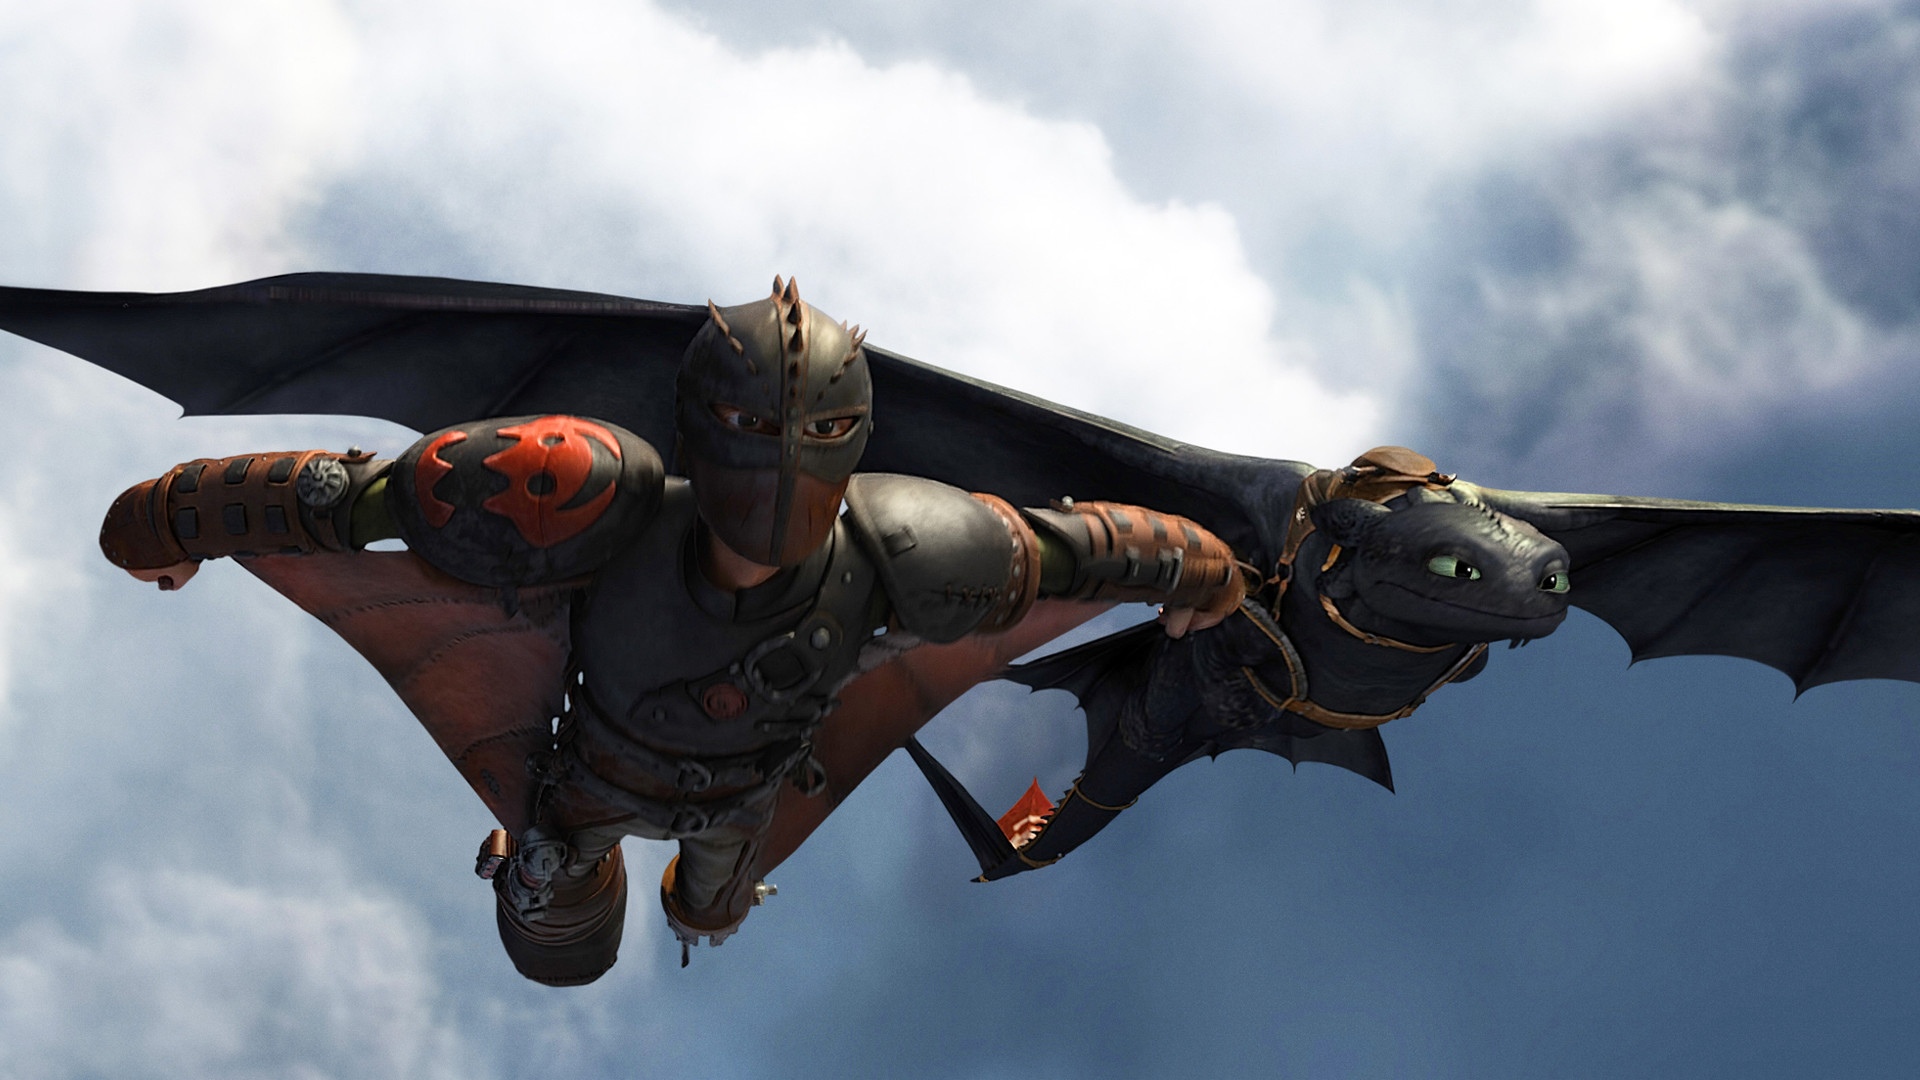 1920x1080 hiccup and toothless / night fury flying in how to train your dragon 2 movie